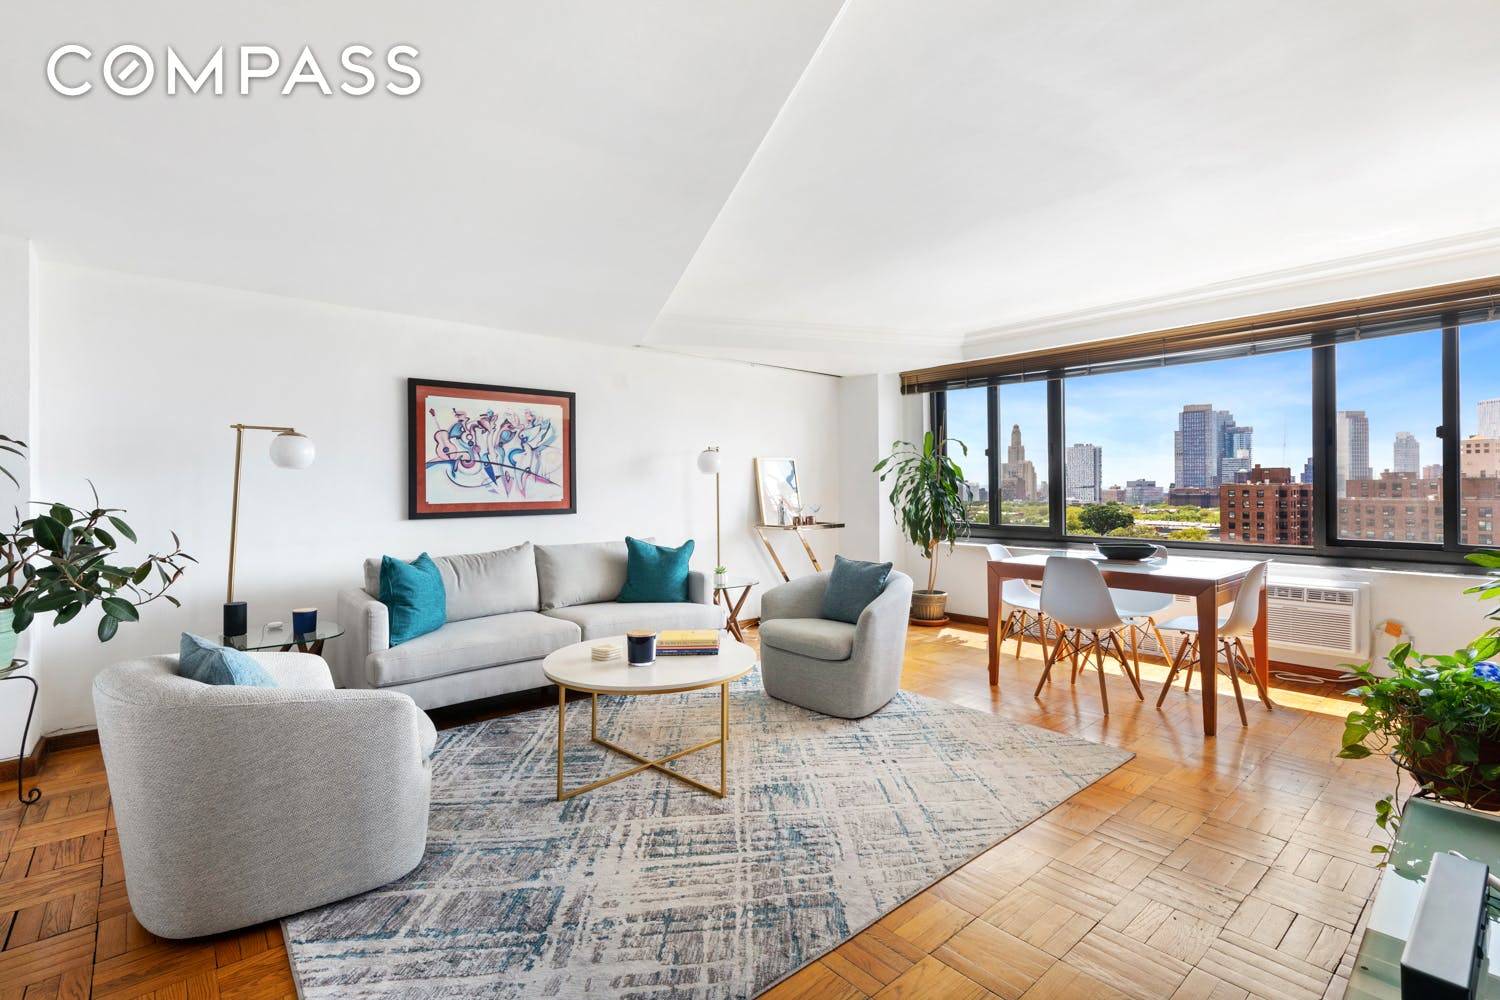 VIEWS VIEWS VIEWS ! ! Perched on an upper floor of a centrally located Clinton Hill coop, this open 2 BD 2BA home with private outdoor space affords a breathtaking ...